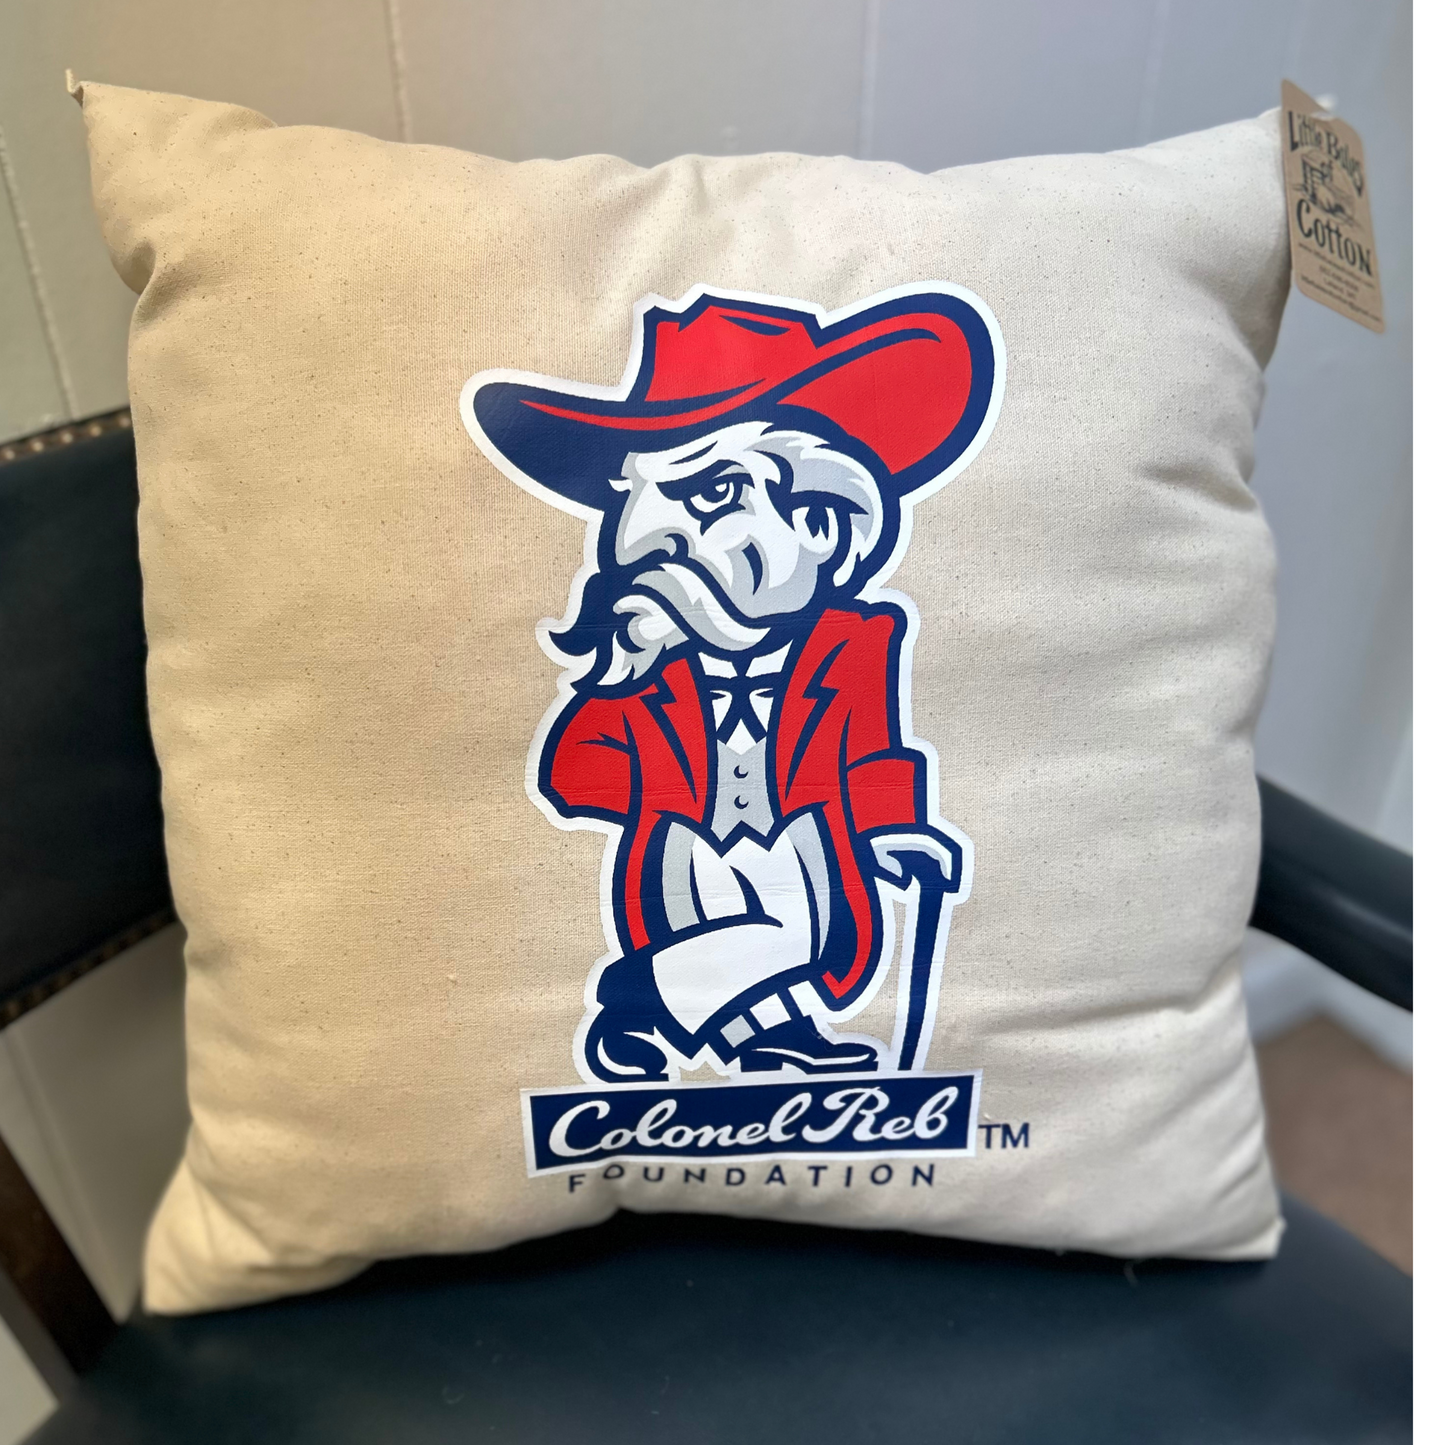 Colonel Traditional Cotton Cloth Pillow